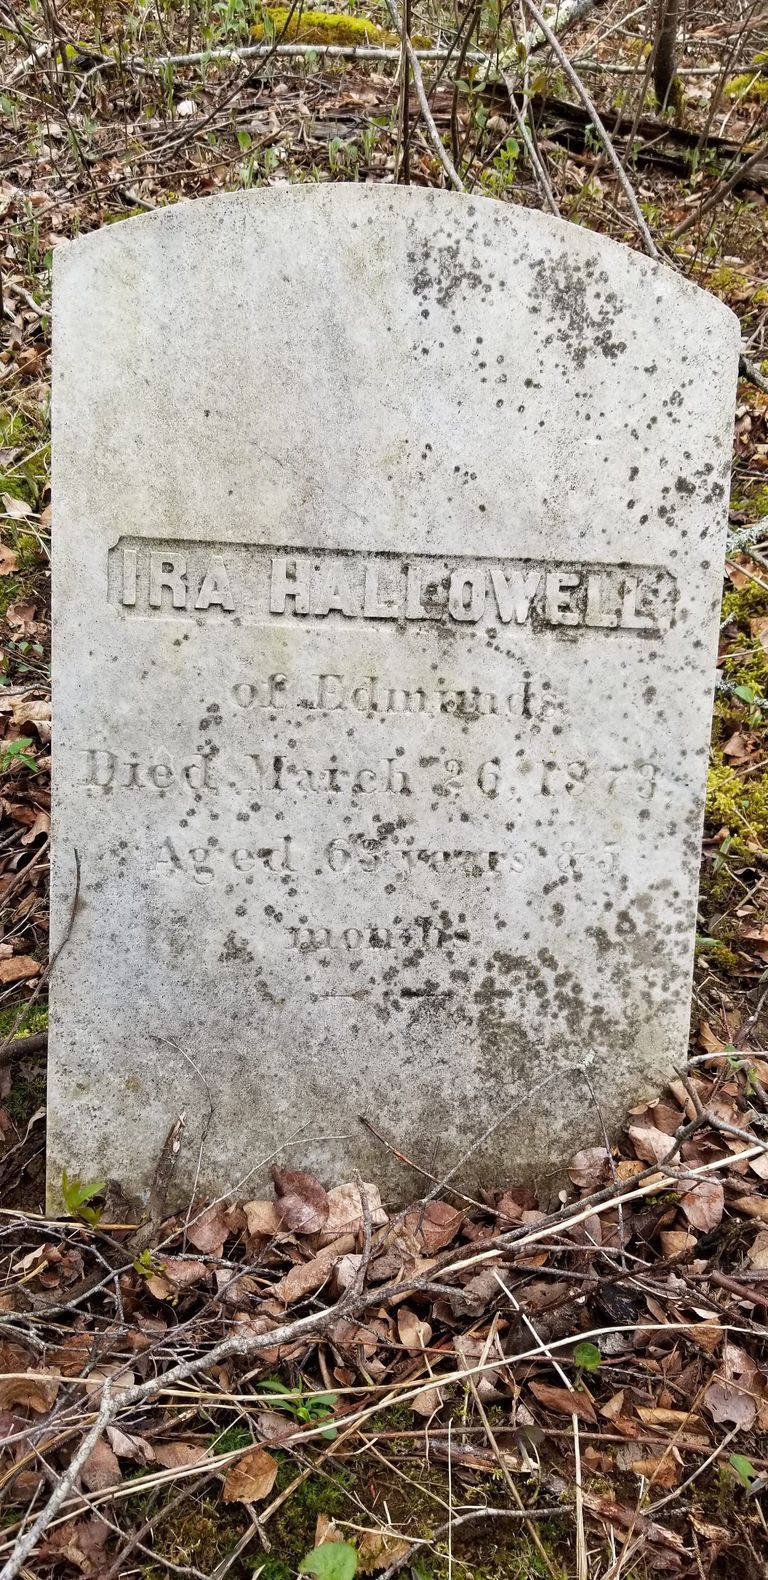          Ira Hallowell Grave, Edmunds, Maine; Inscription reads: Ira Hallowell Of Edmunds, died March 26, 1873, Aged 63 years and 5 months
   